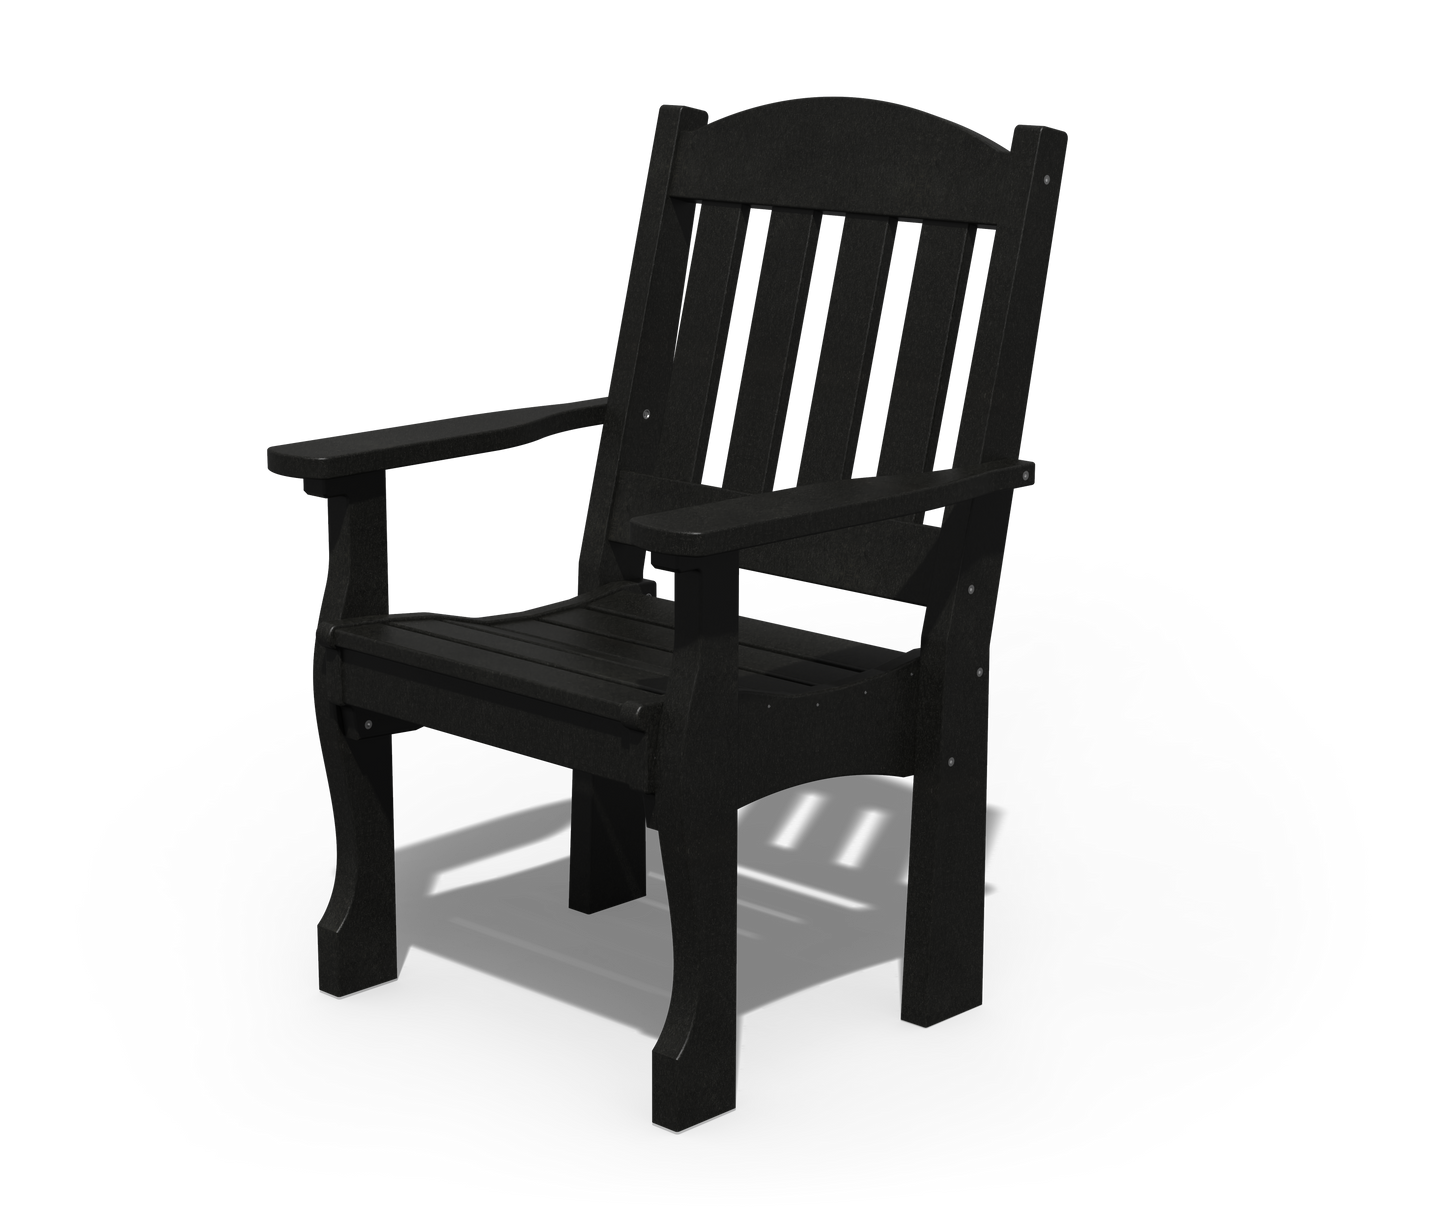 Patiova Recycled Plastic English Garden Dining Arm Chair - LEAD TIME TO SHIP 4 WEEKS